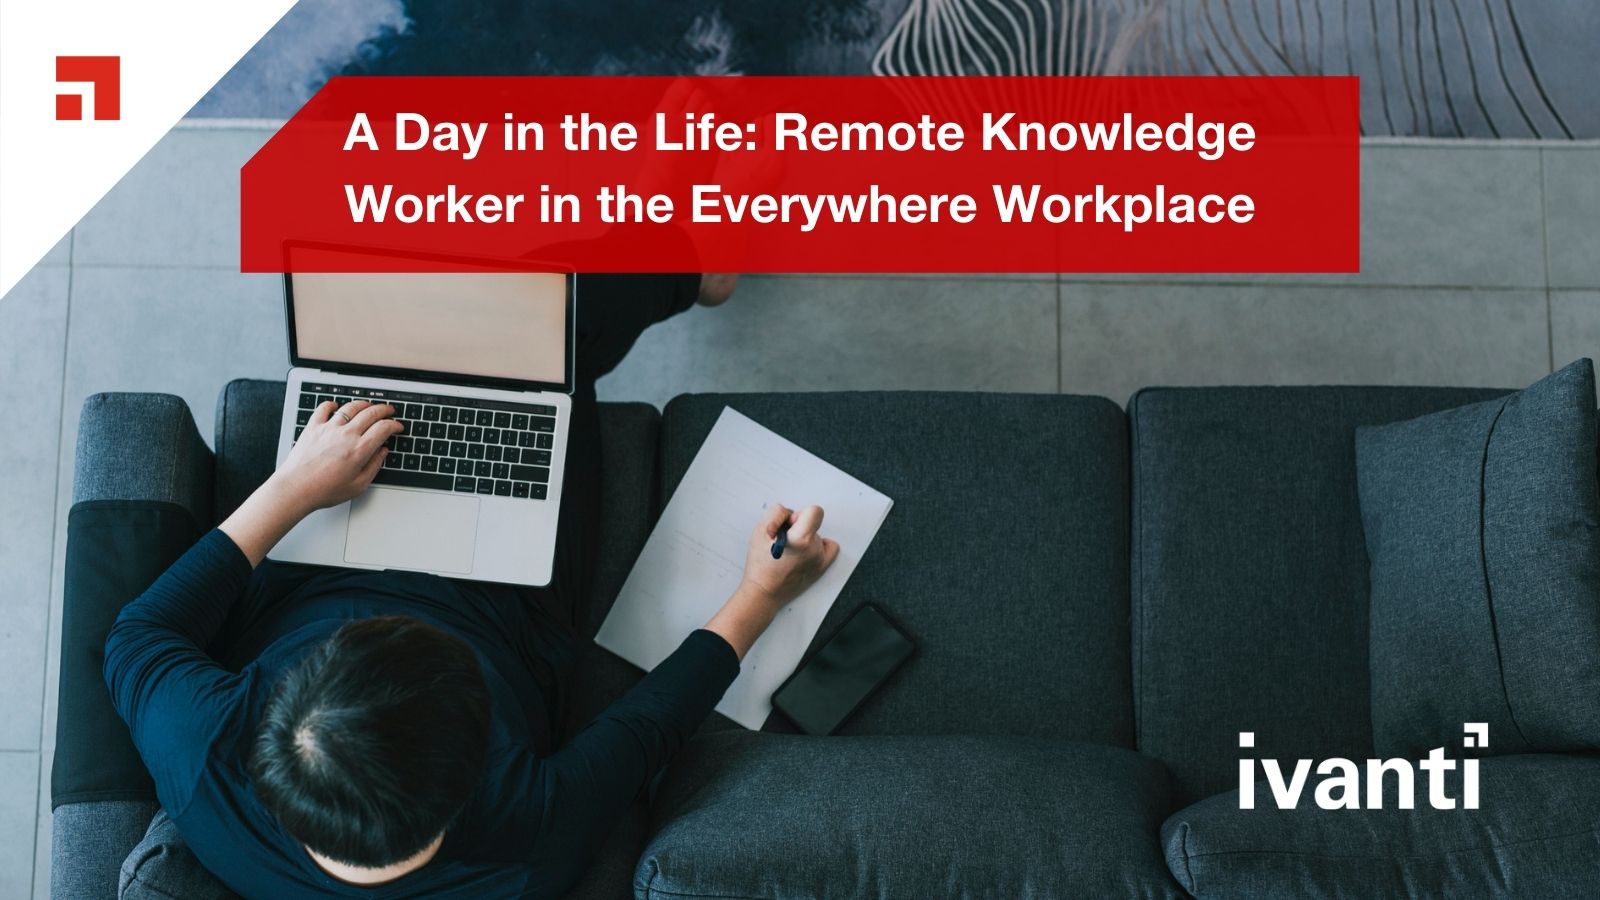 A Day in the Life: Remote Knowledge Worker in the Everywhere Workplace 